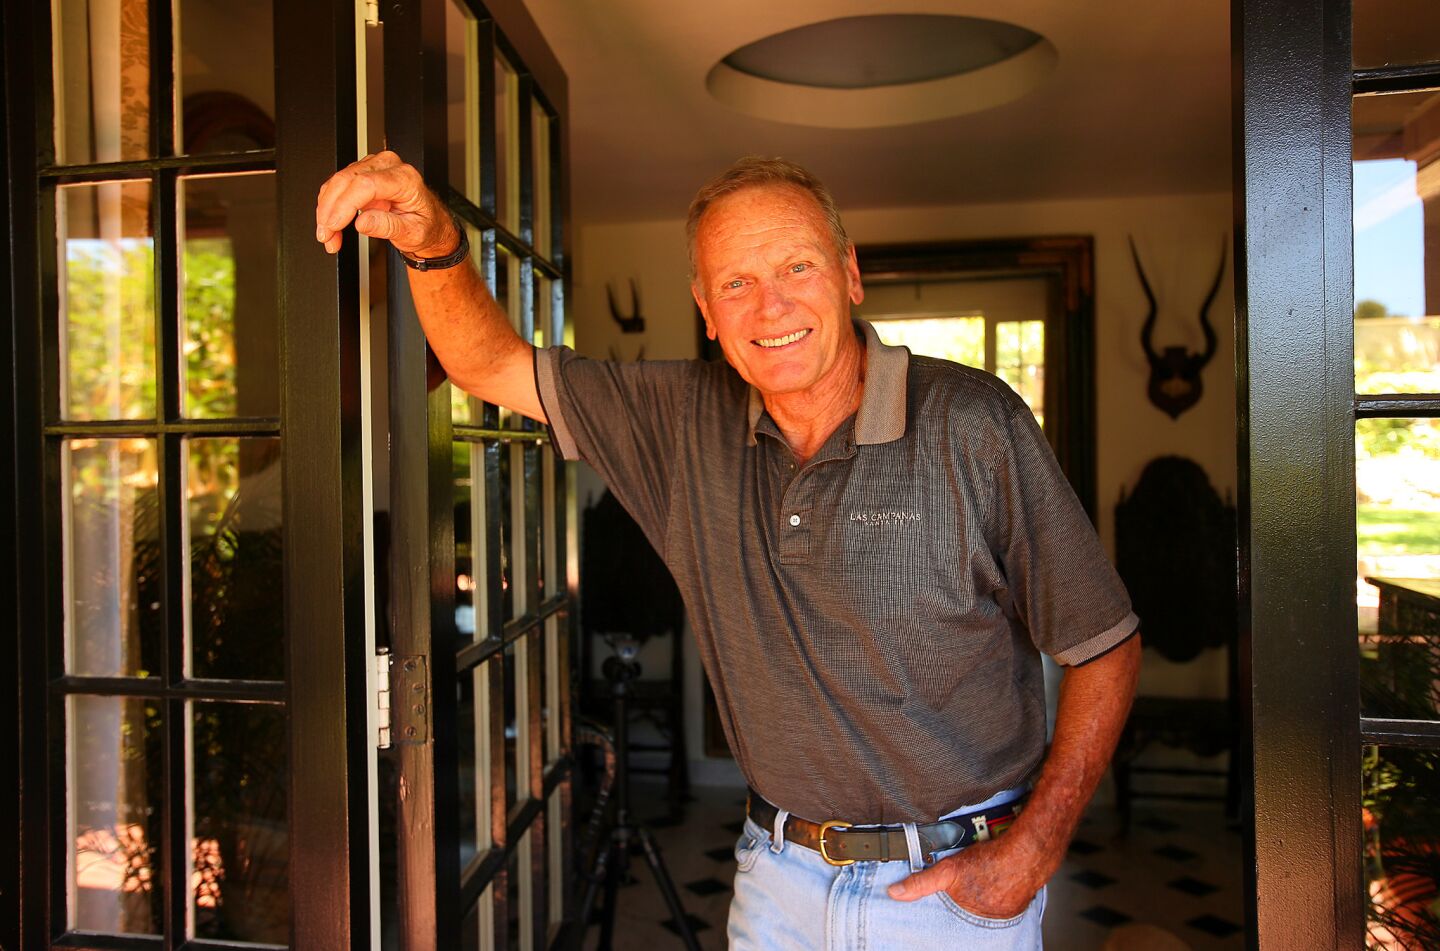 Actor Tab Hunter at the front door of his house in Montecito.